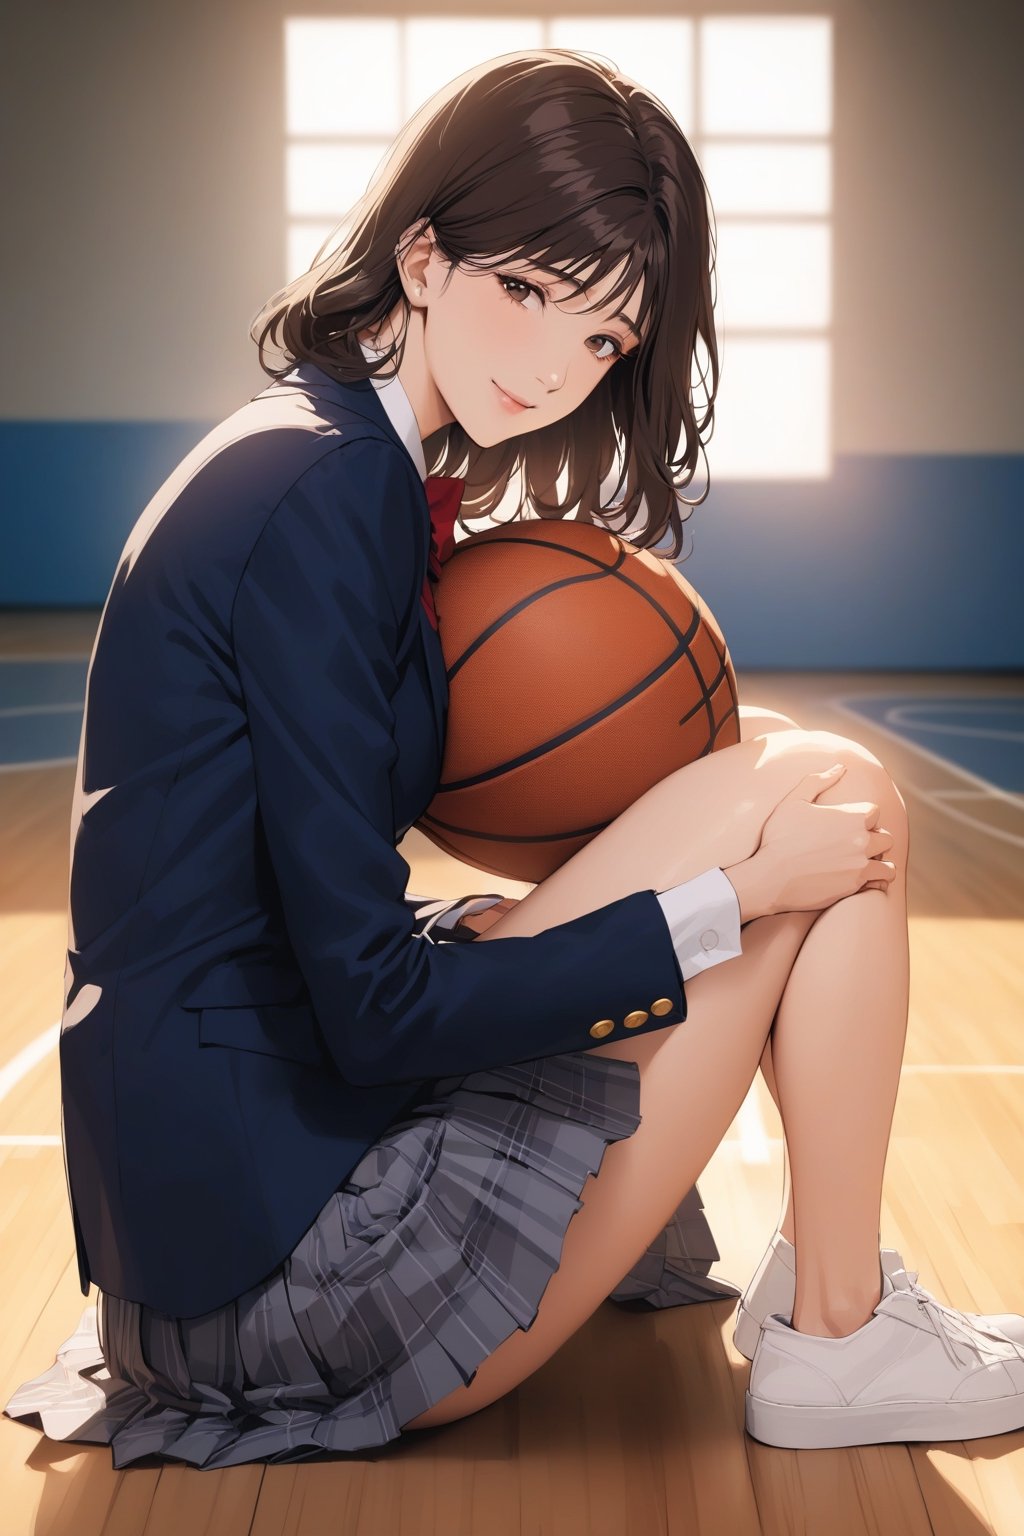 score_9, score_8_up, score_7_up, score_6_up, rating_explicit, masterpiece, best quality, beautiful lighting, haruk0akagi, navy school uniform, skirt, brown hair, pleated skirt, long sleeves, red bow, basketball court, indoor, knees to chest, sitting on court, holding basketball, light smile, from side, lookin at viewer, sunset